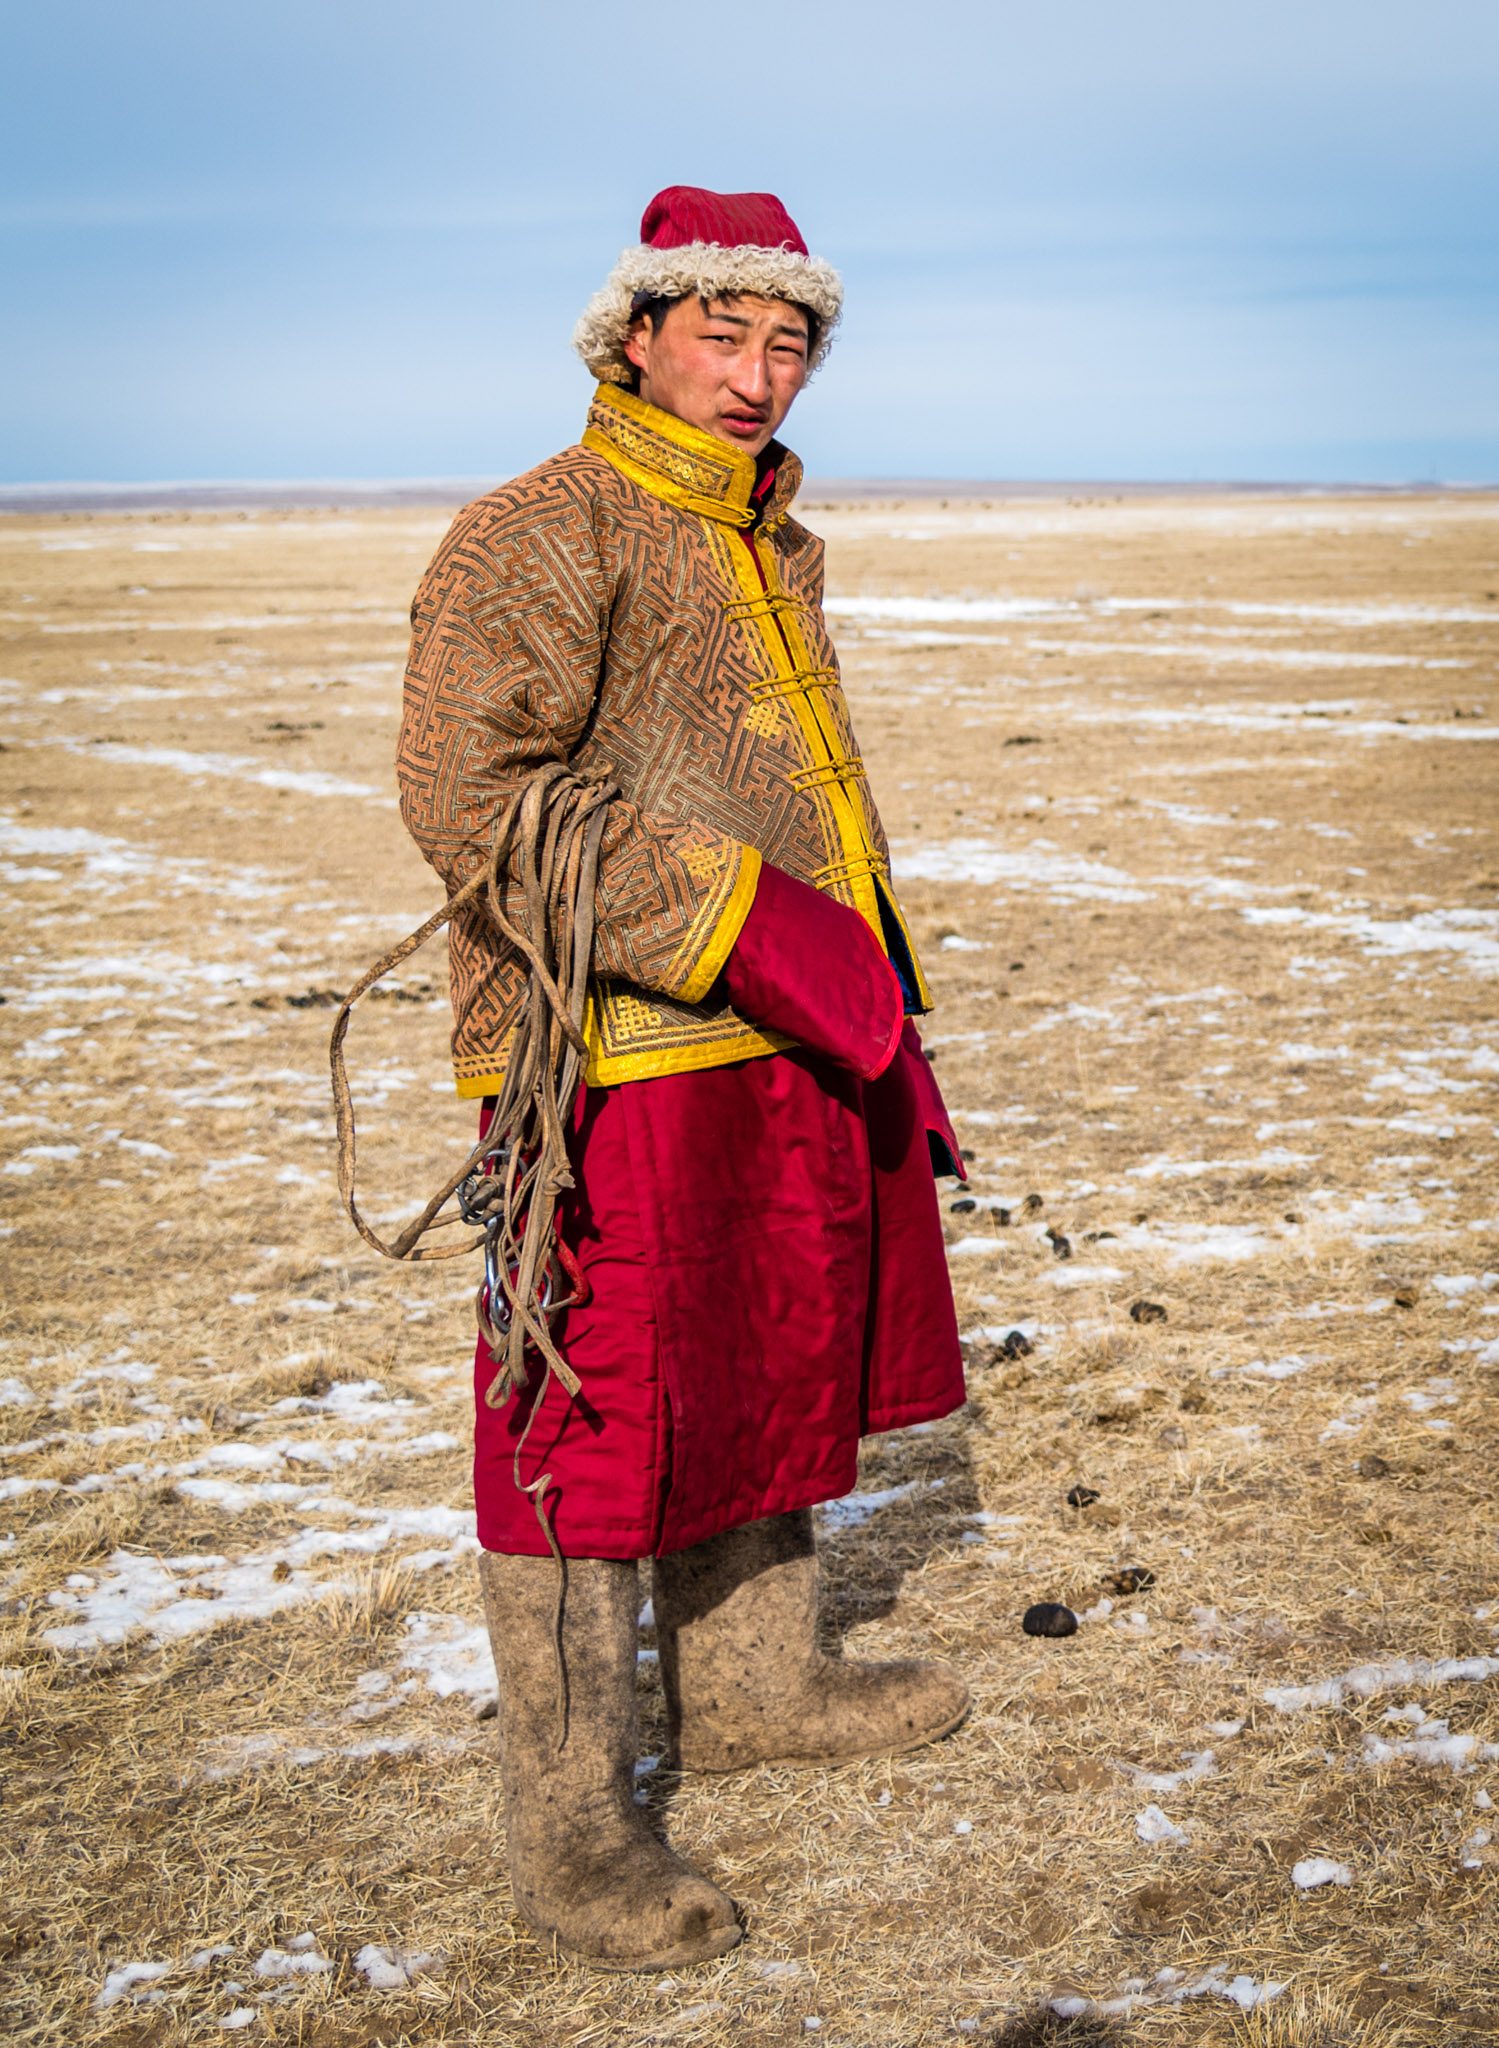 Horsemen wear beautiful clothes and boots to fight the extreme cold weather. Temperatures in winter often drop below -30C. It is a tough life.